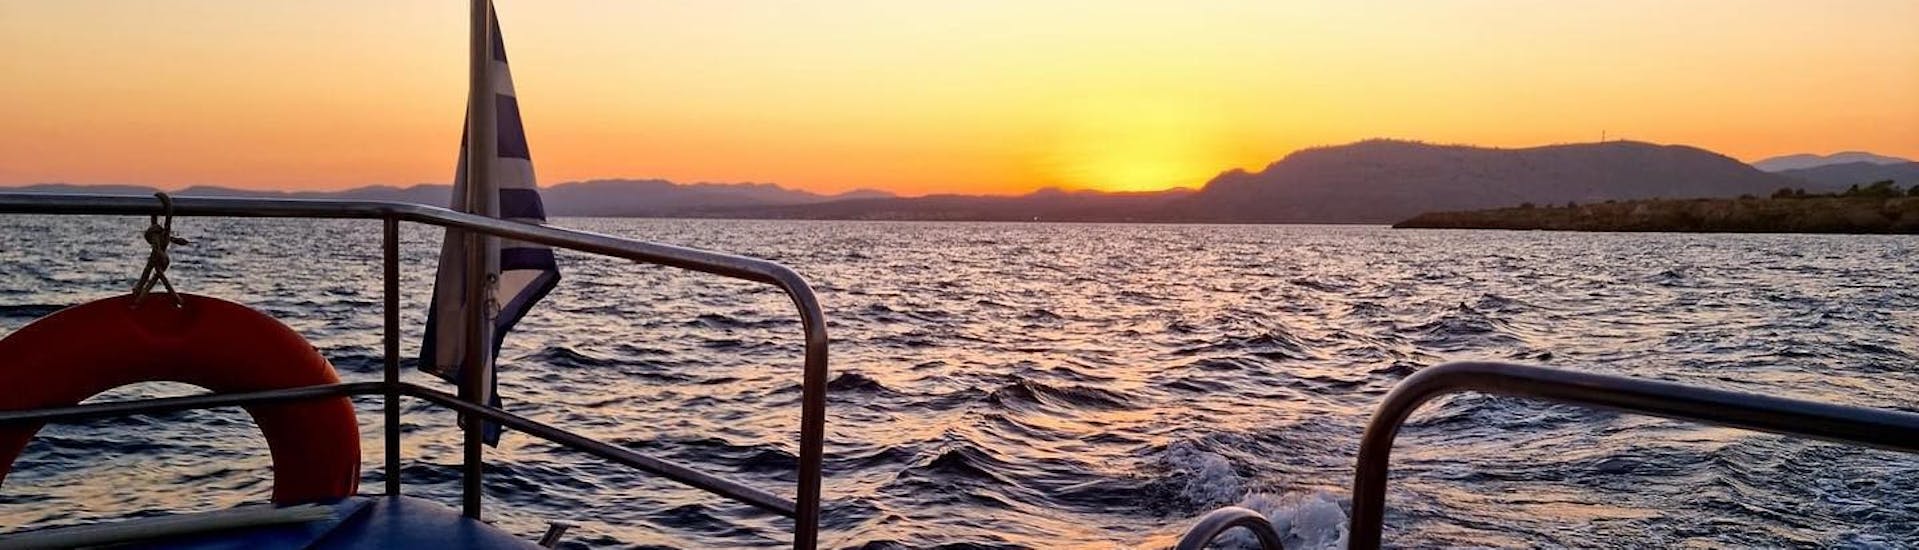 The sun is setting during the Sunset Glass-Bottom Boat Trip to Navarone Bay & Pefkos.